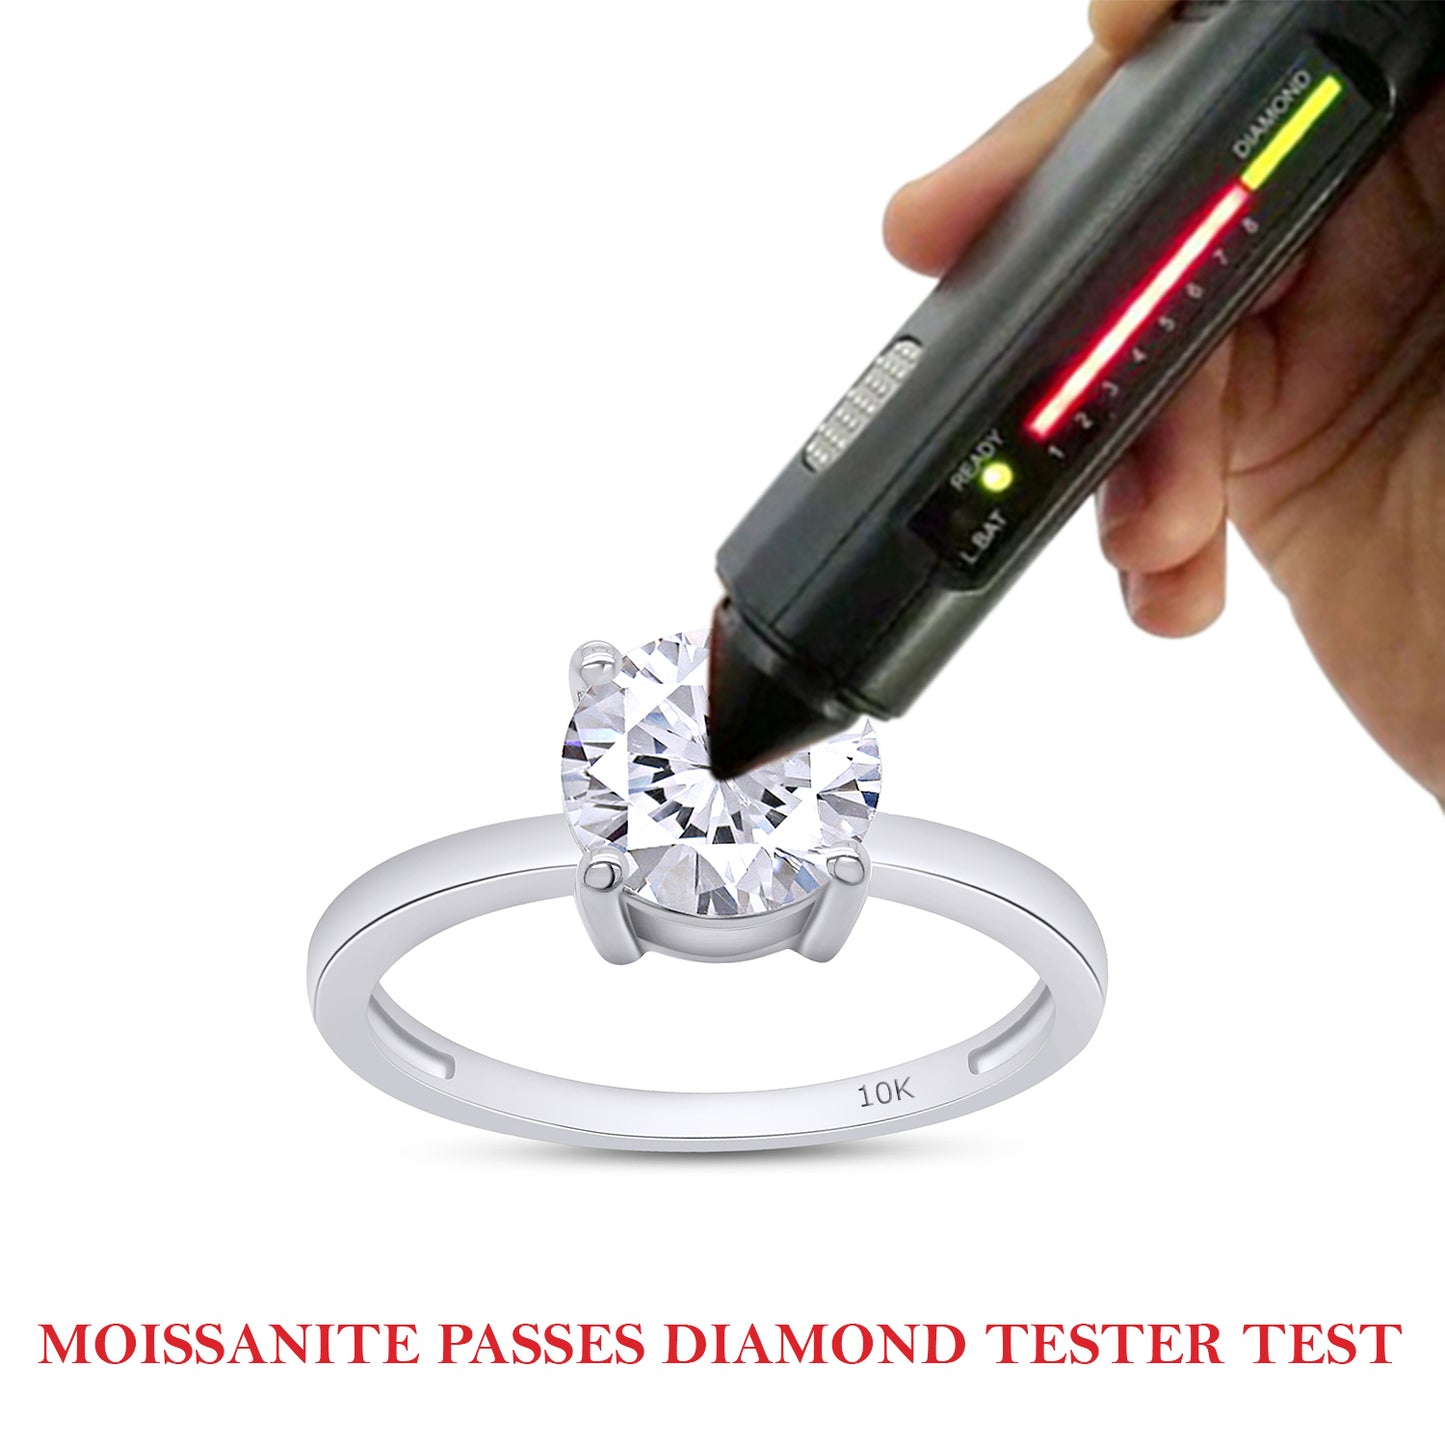 Load image into Gallery viewer, 7.5MM Round Cut Lab Created Moissanite Diamond Engagement Ring In 10K Or 14K Solid Gold (1.50 Cttw)
